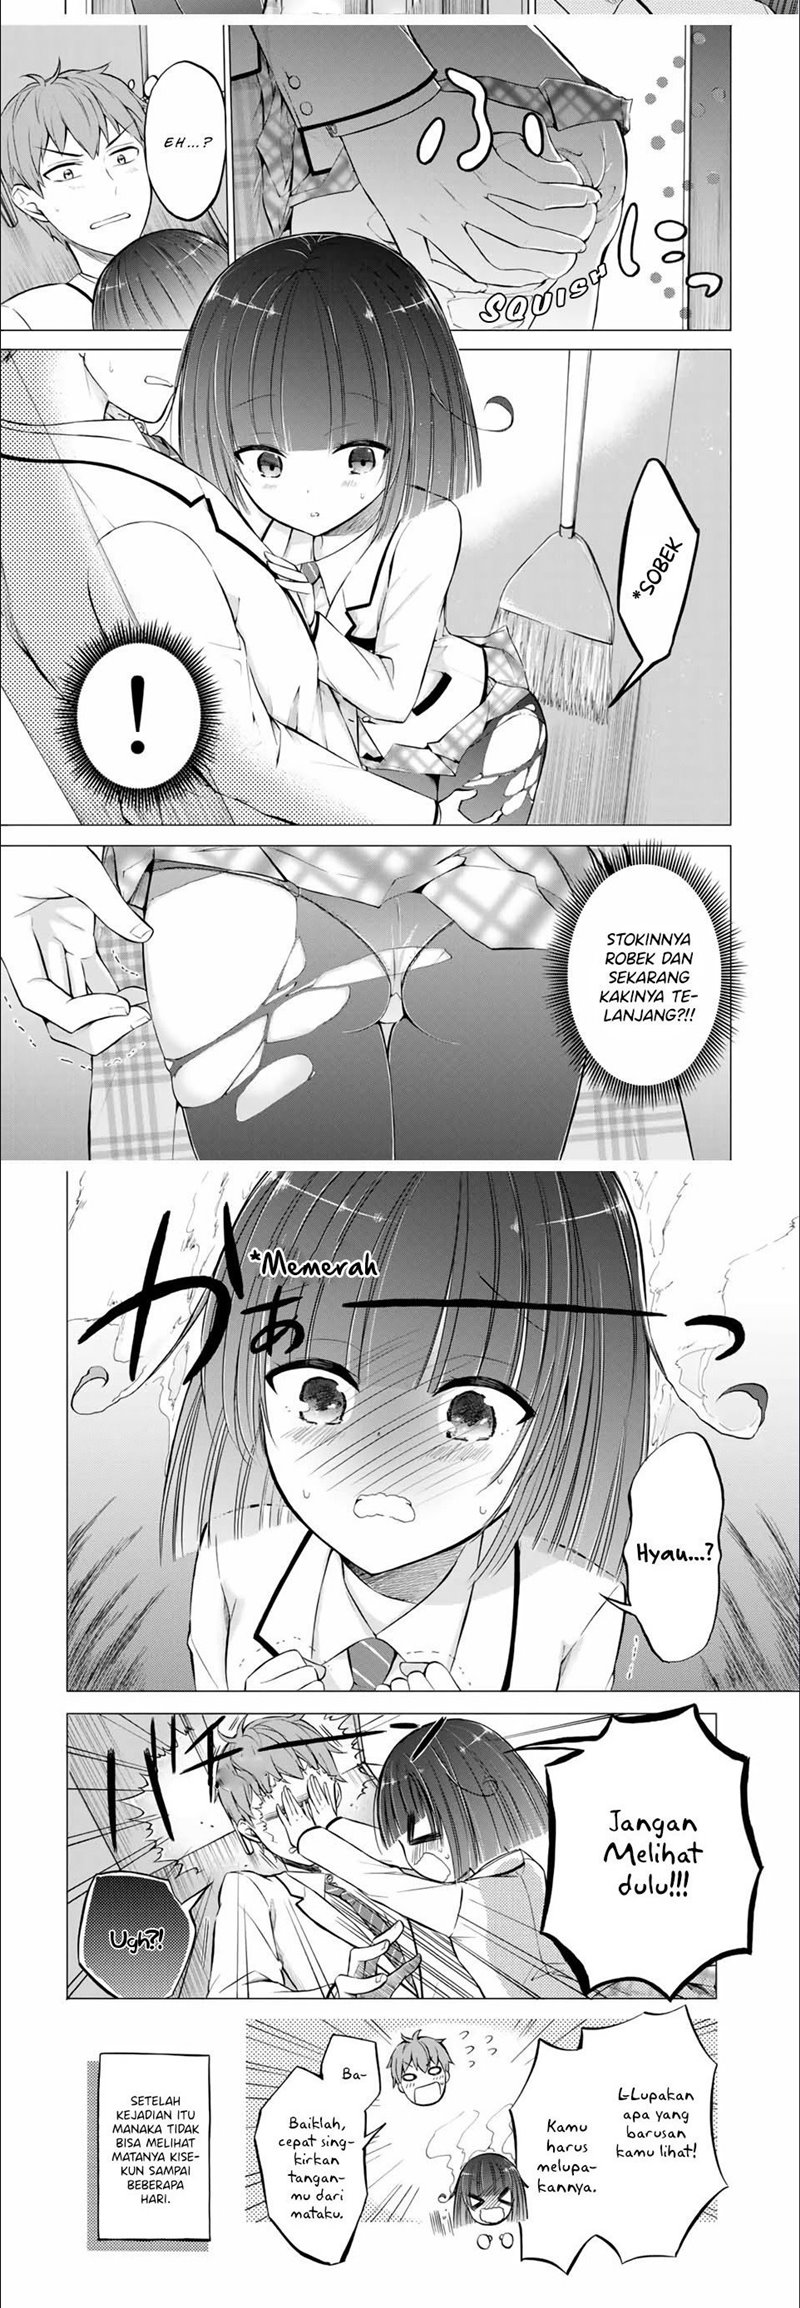 The Student Council President Solves Everything on the Bed Chapter 5.5